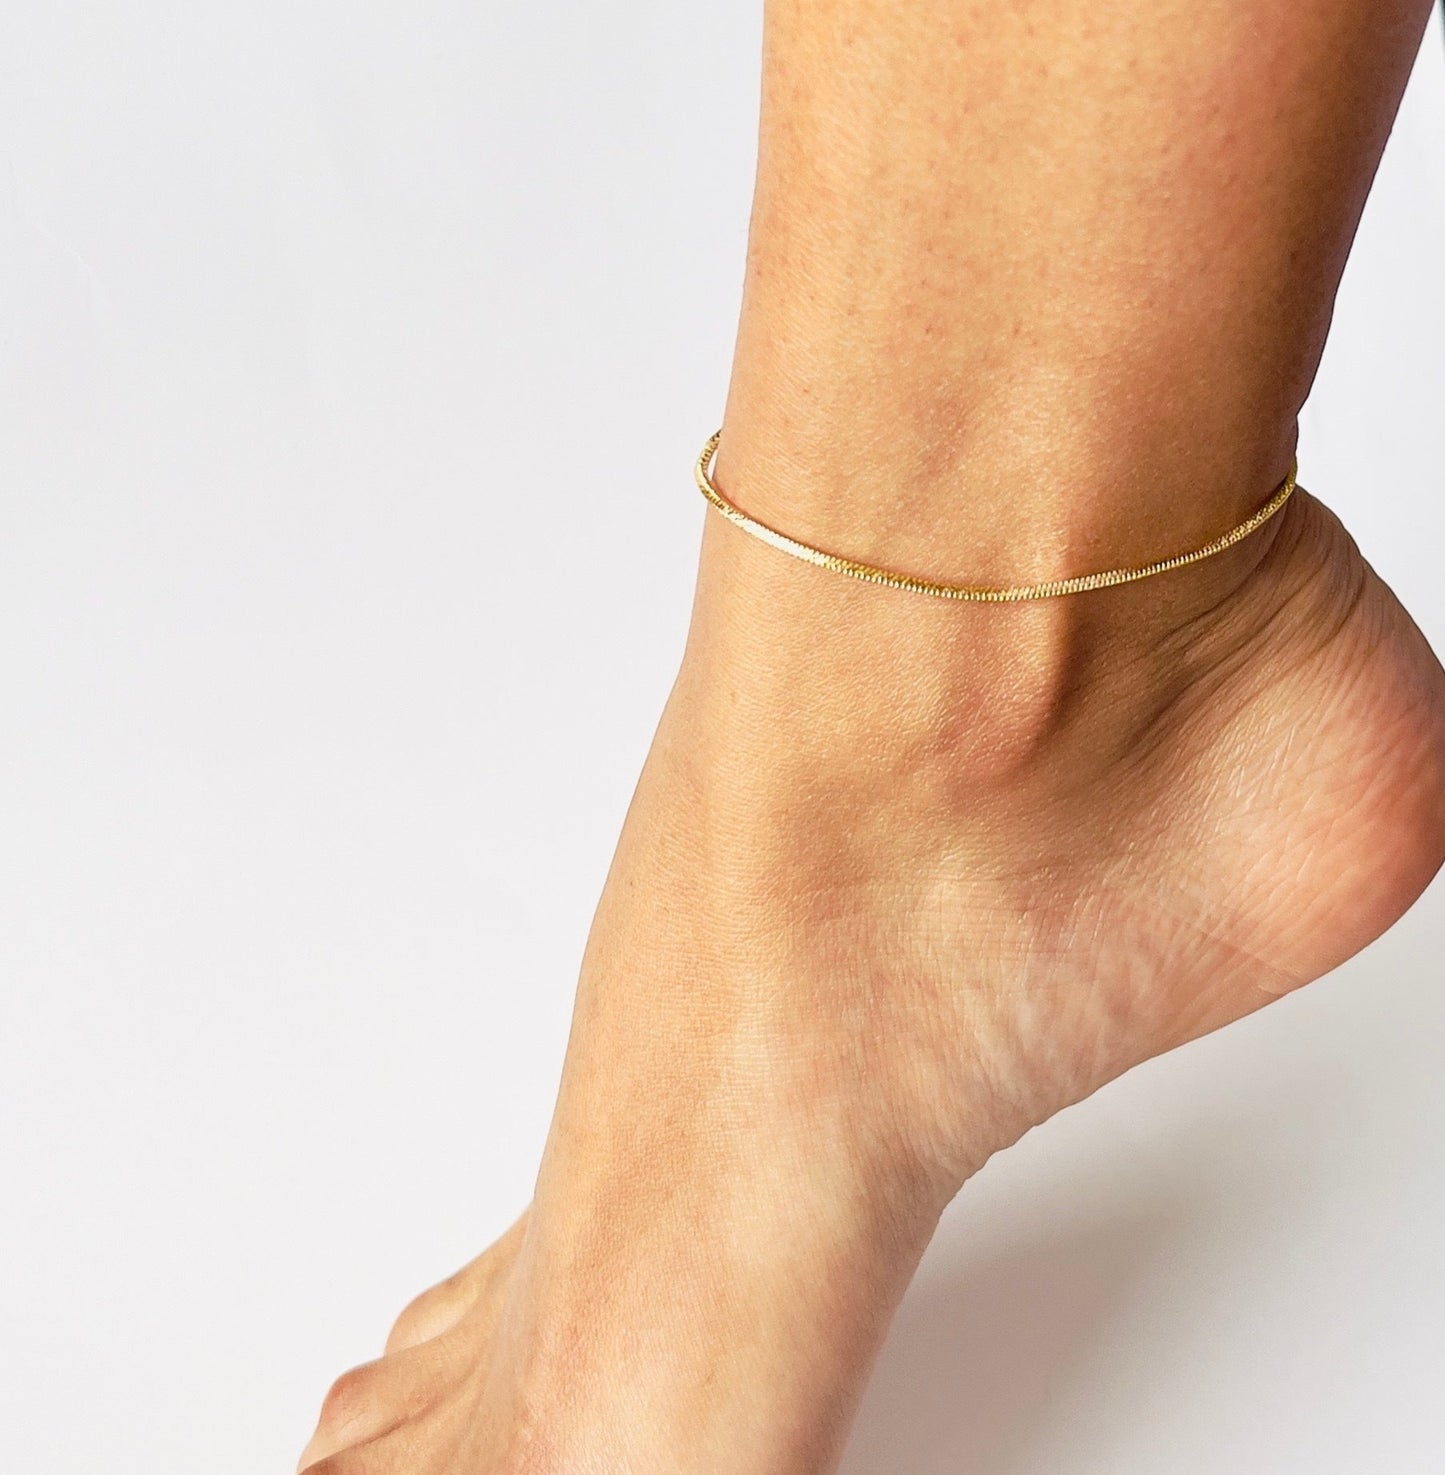 Modern gold plated snake chain anklet with lobster clasp - Perfect for everyday wear and special occasions